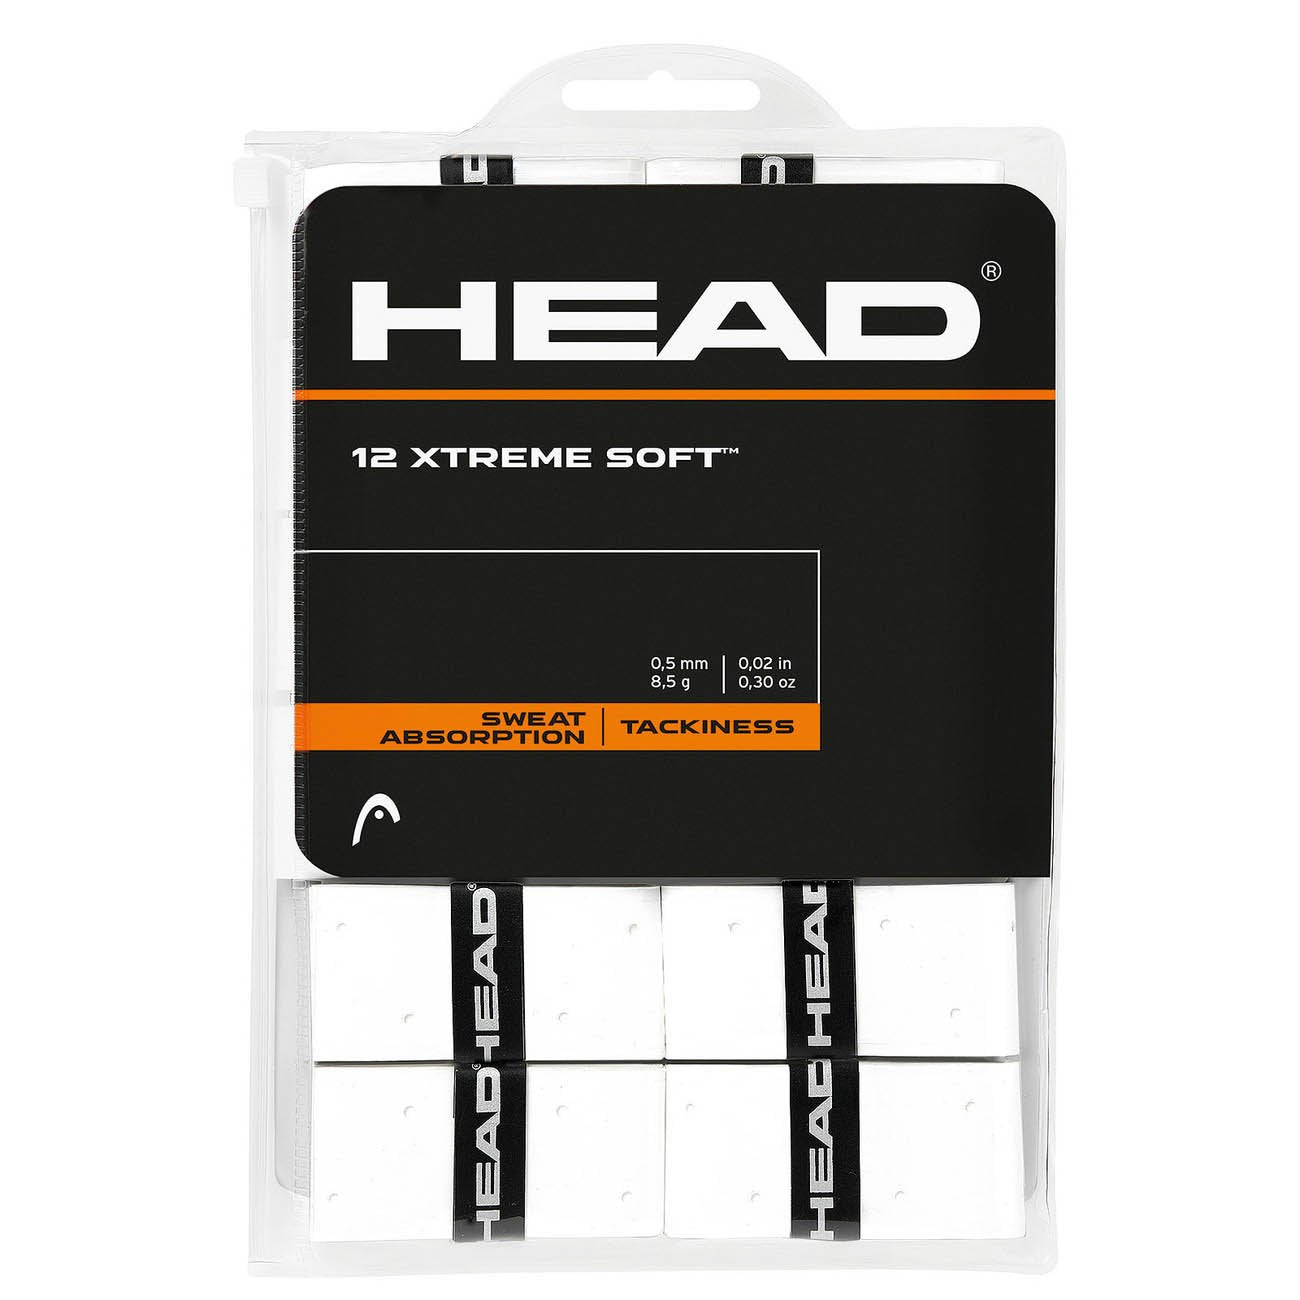 Head XTREME Soft Overgrips - 12 pack (White) - atr-sports